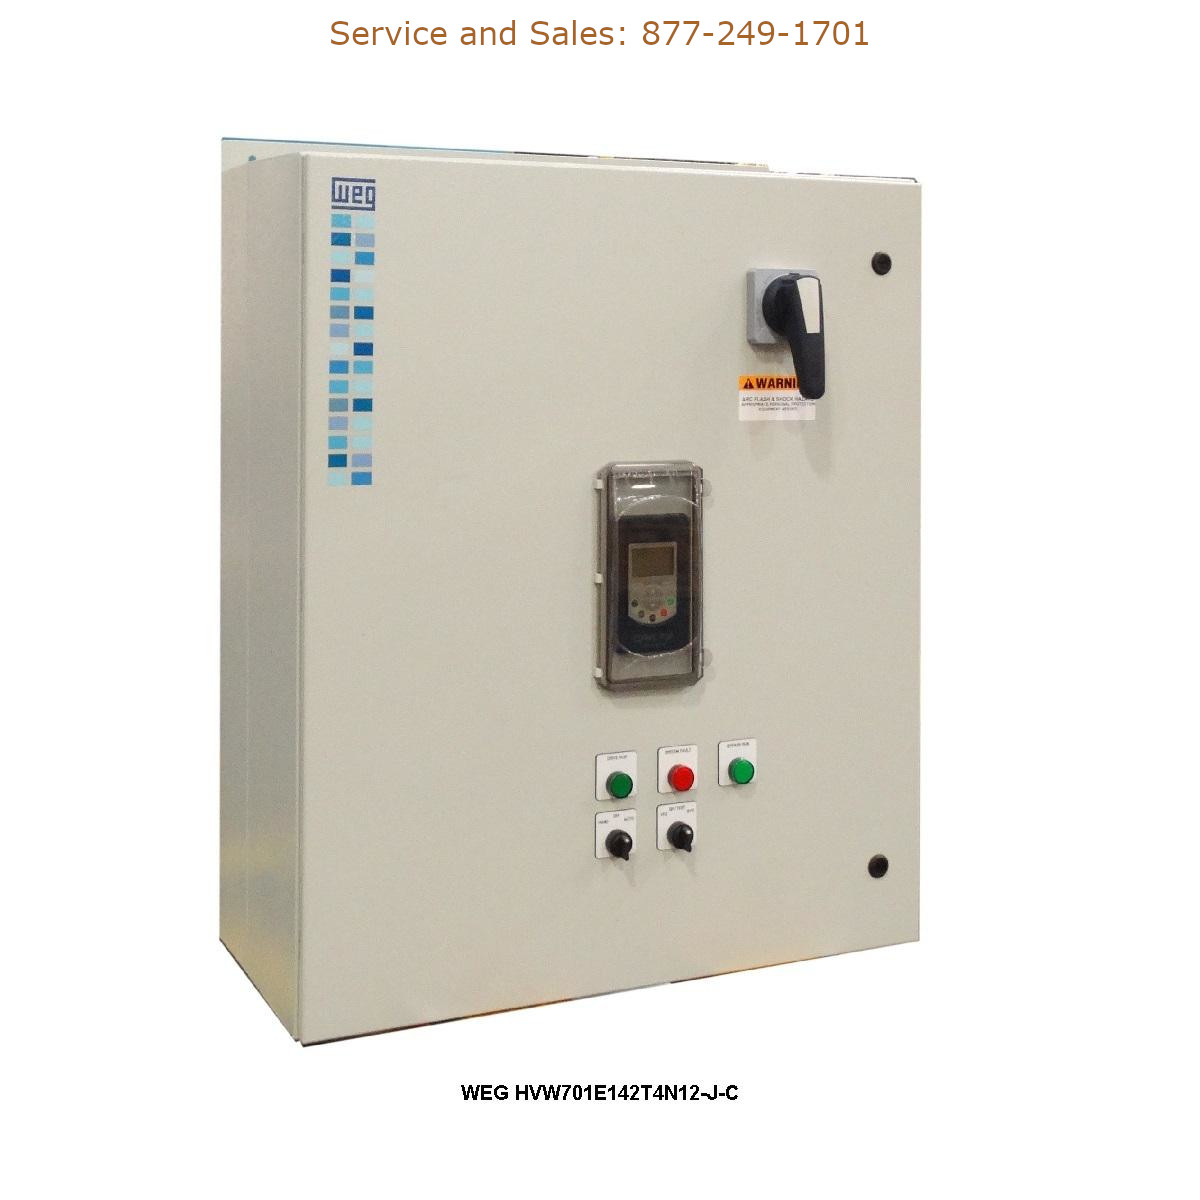 WEG HVW701E142T4N12-J-C WEG Model Number HVW701E142T4N12-J-C WEG Drives, Variable Speed Drives Repair Service, Troubleshooting, Replacement Parts https://gesrepair.com/wp-content/uploads/2022/WEG/WEG_HVW701E142T4N12-J-C_Drives_Variable_Speed_Drives.jpg